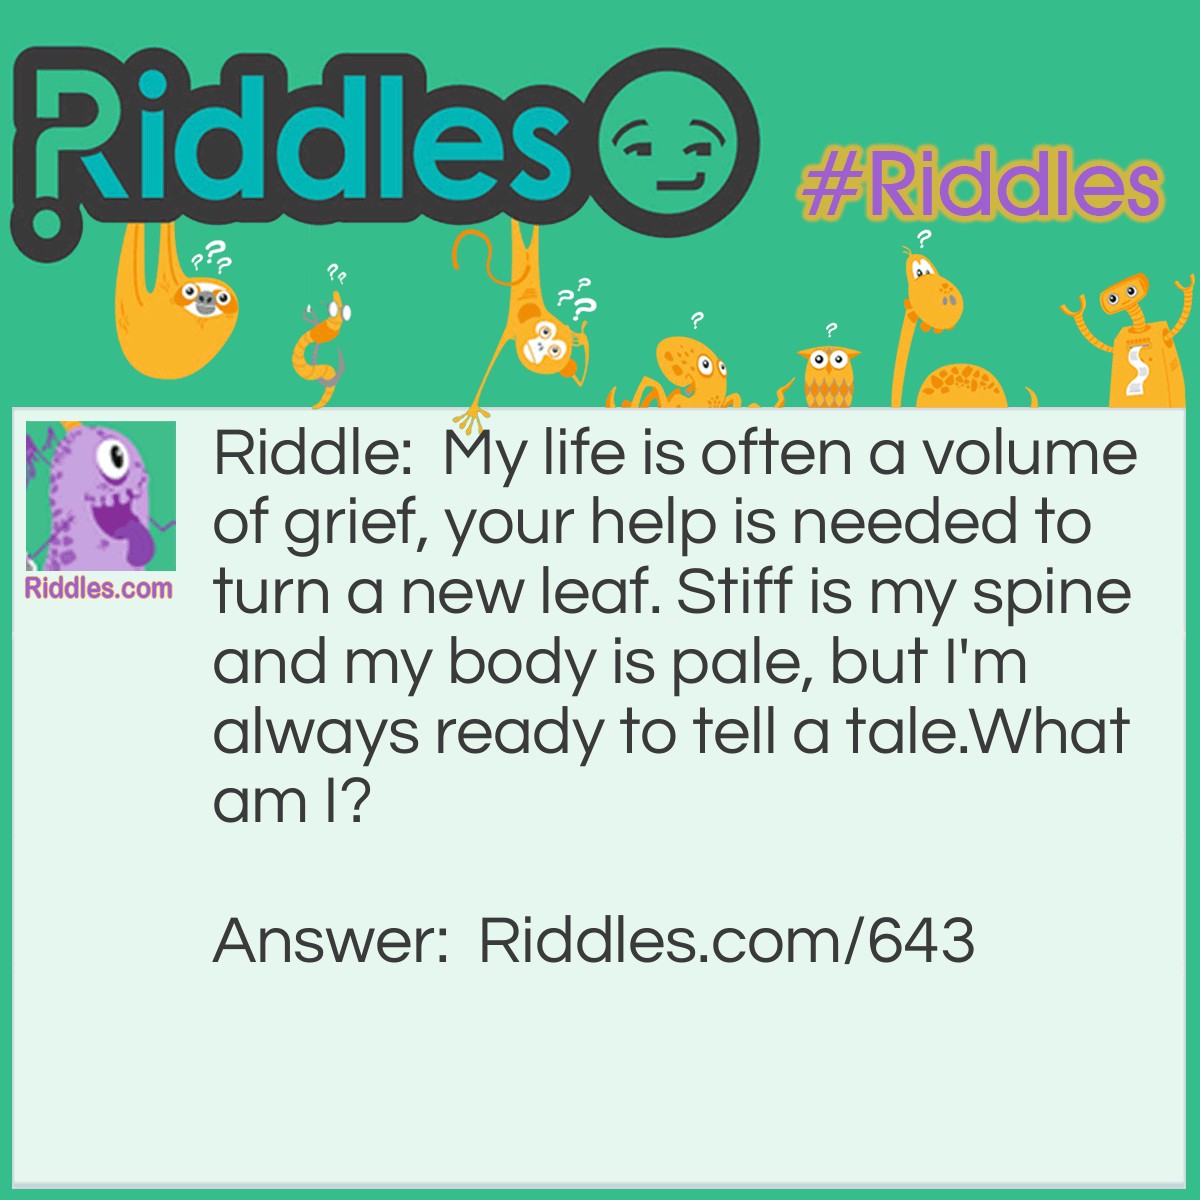 Riddle: My life is often a volume of grief, your help is needed to turn a new leaf. Stiff is my spine and my body is pale, but I'm always ready to tell a tale.
What am I? Answer: Sadly, I am a Book.